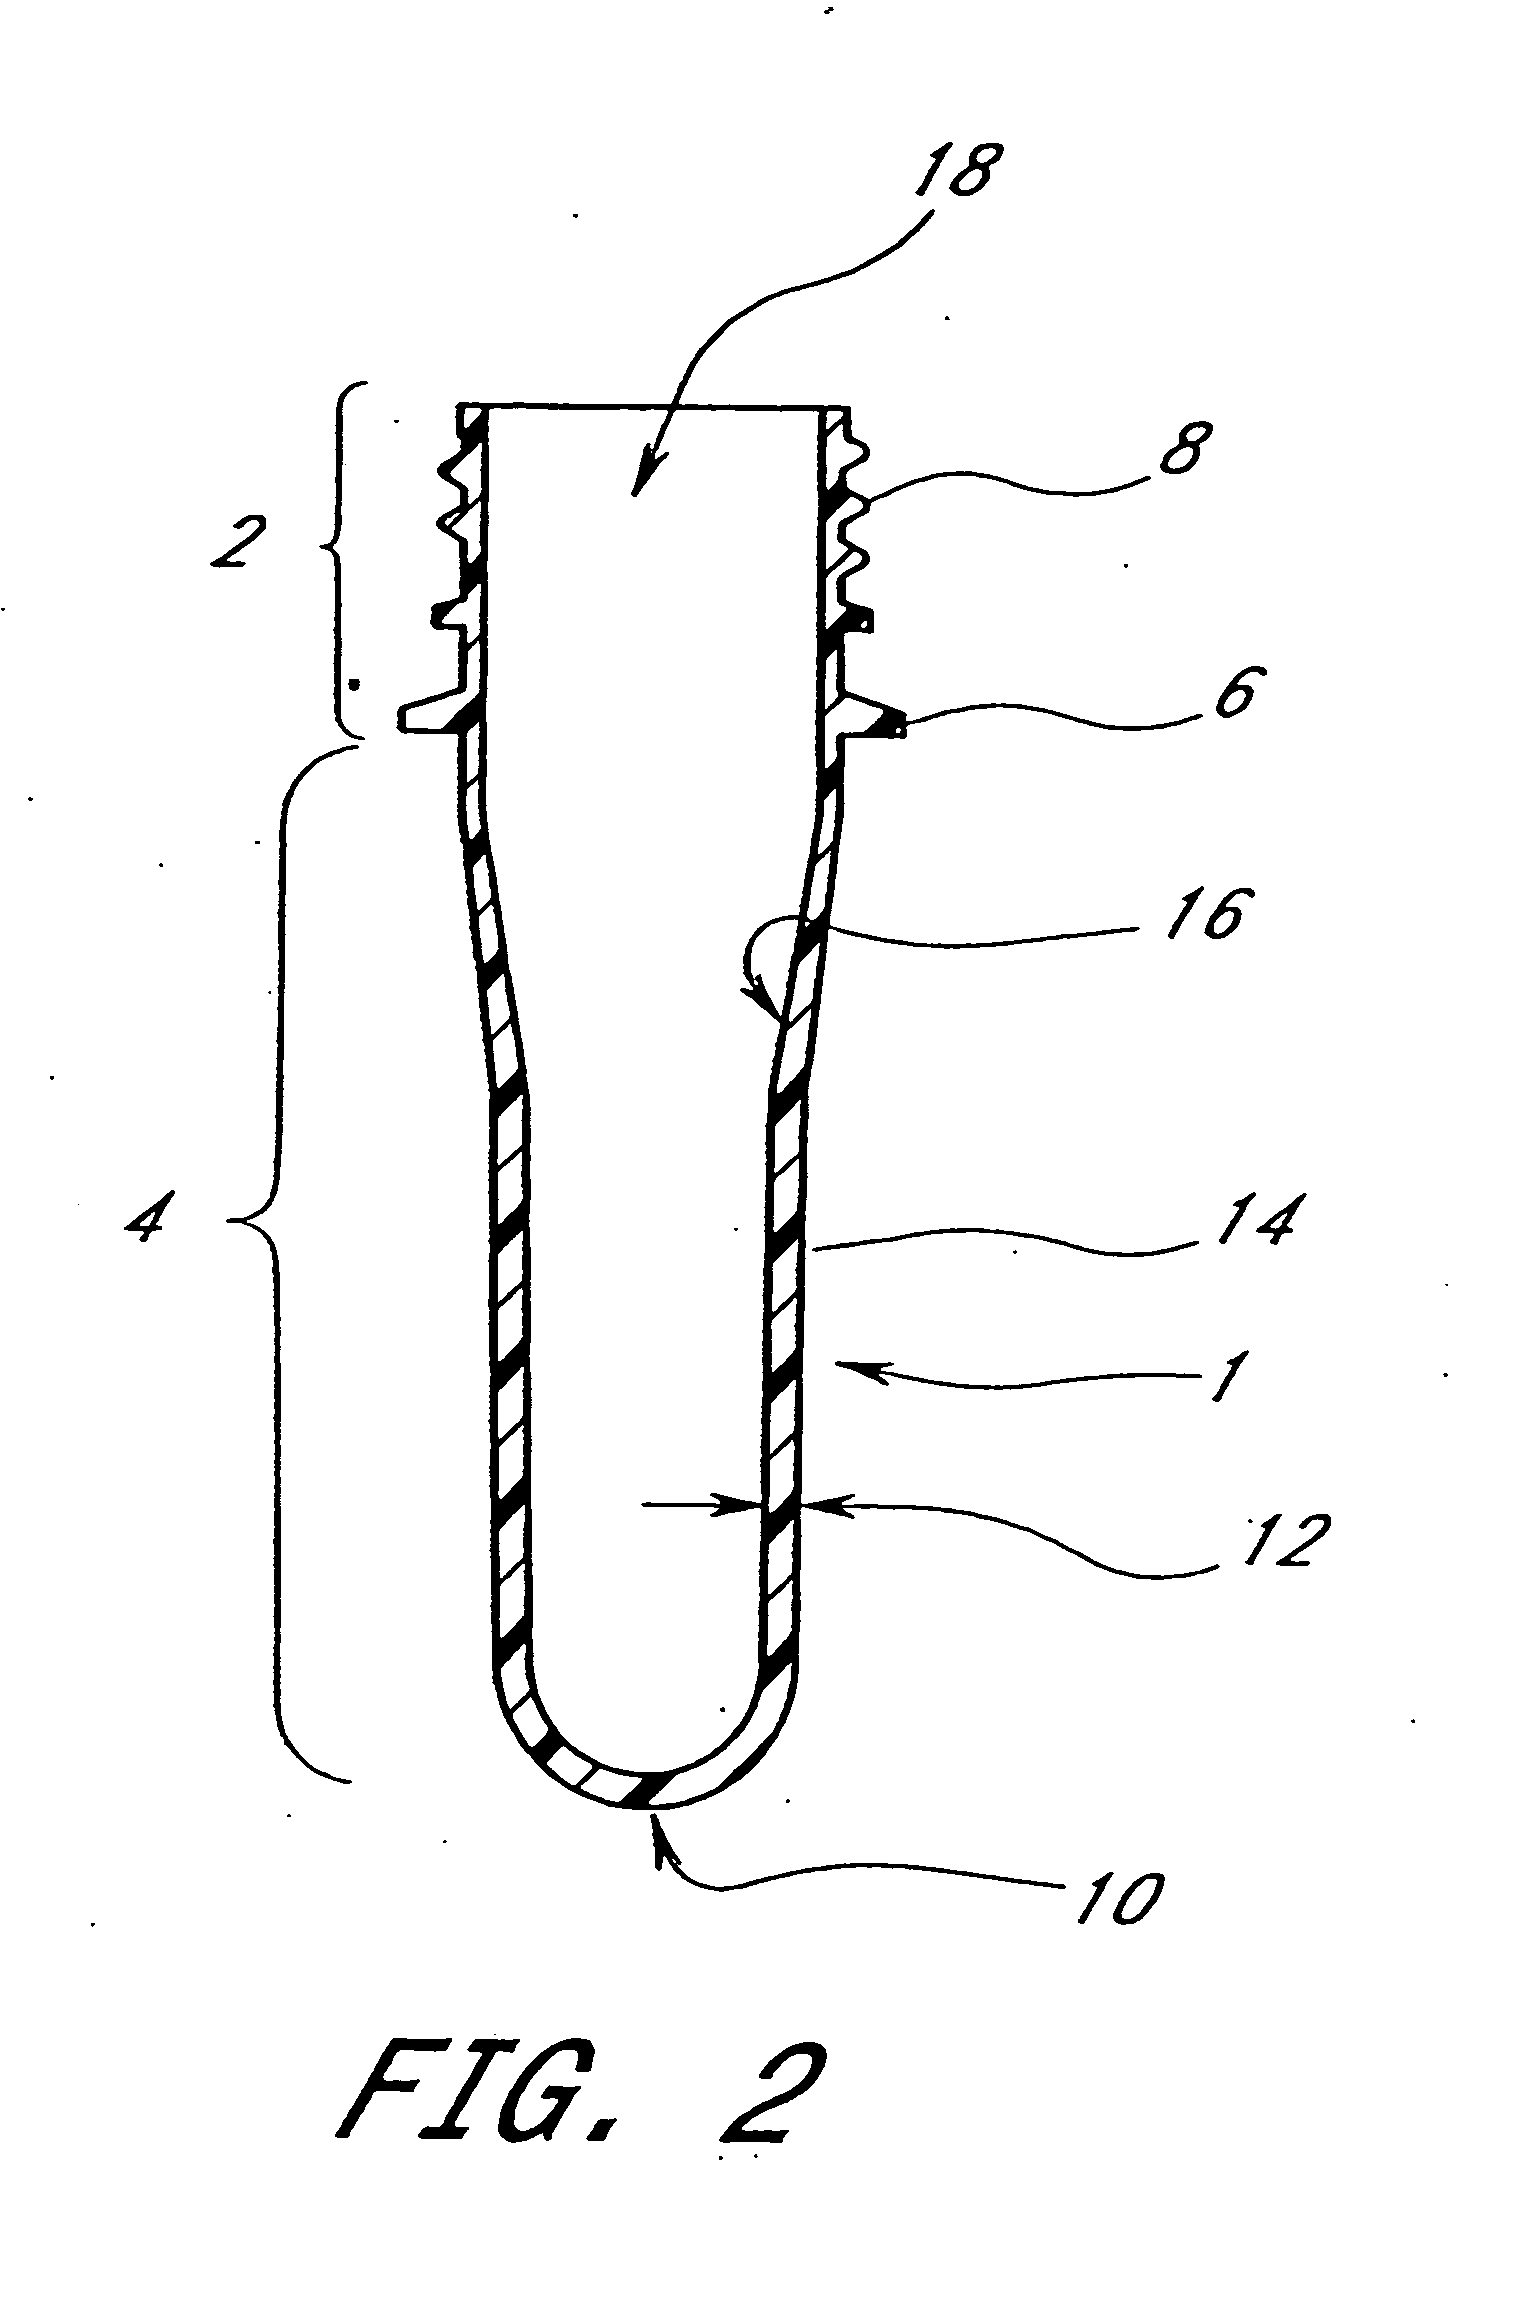 Water-resistant coated articles and methods of making same